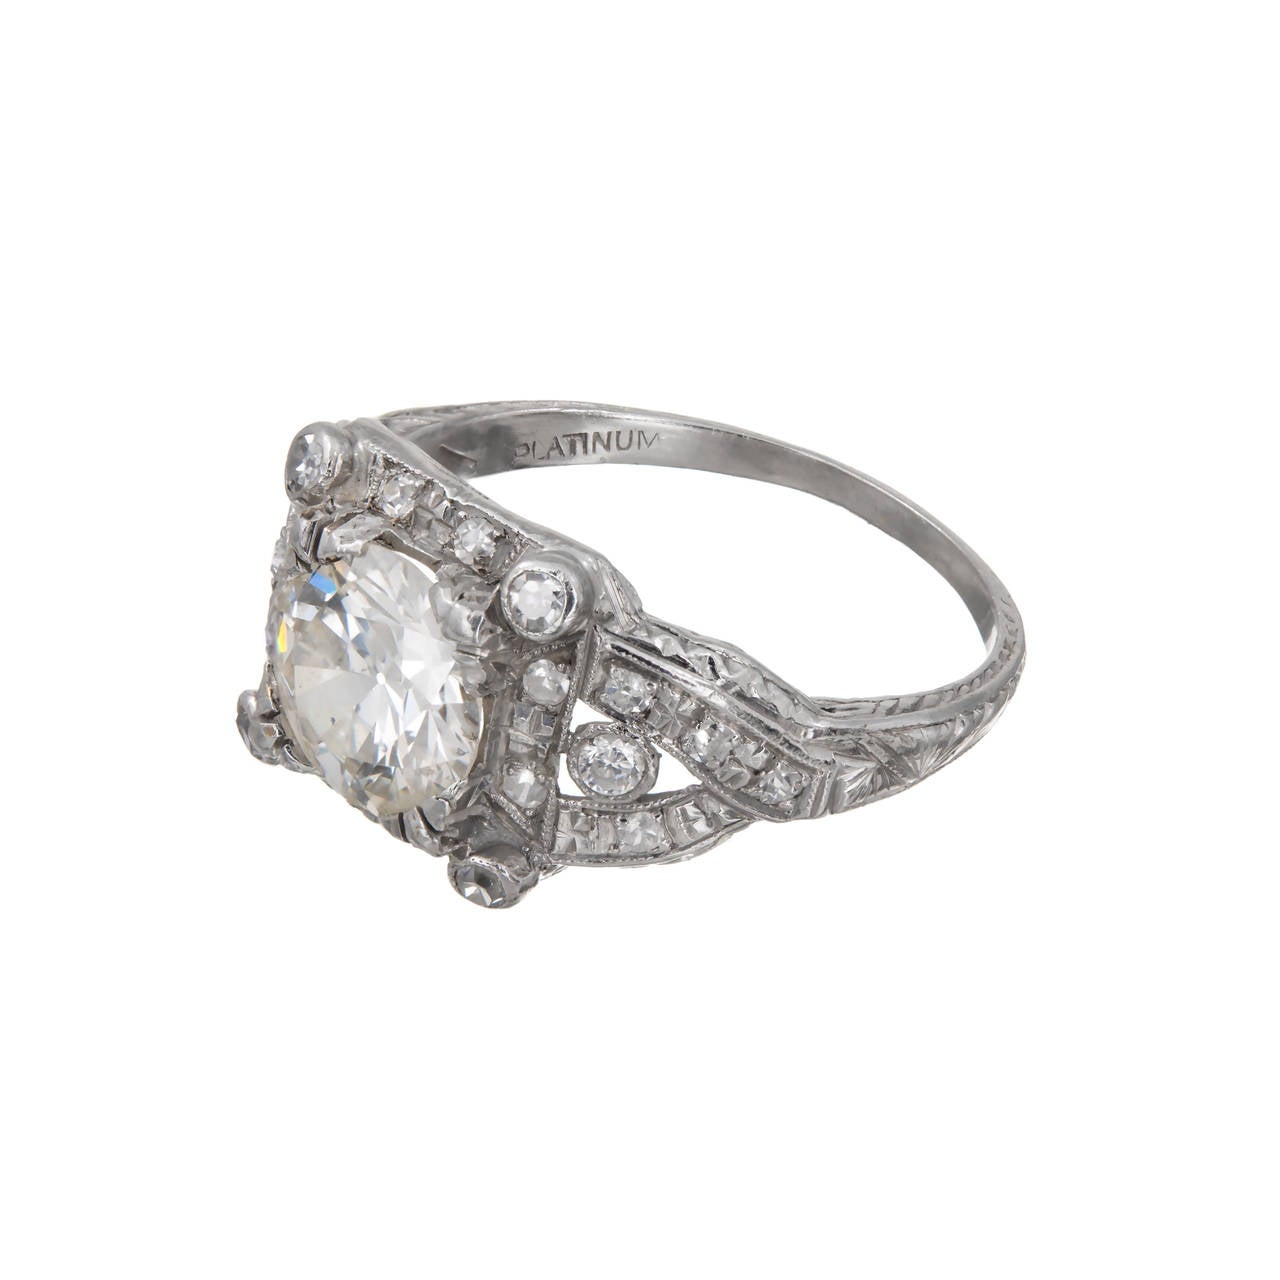 1.35 Carat Diamond Platinum Engagement Ring In Good Condition For Sale In Stamford, CT